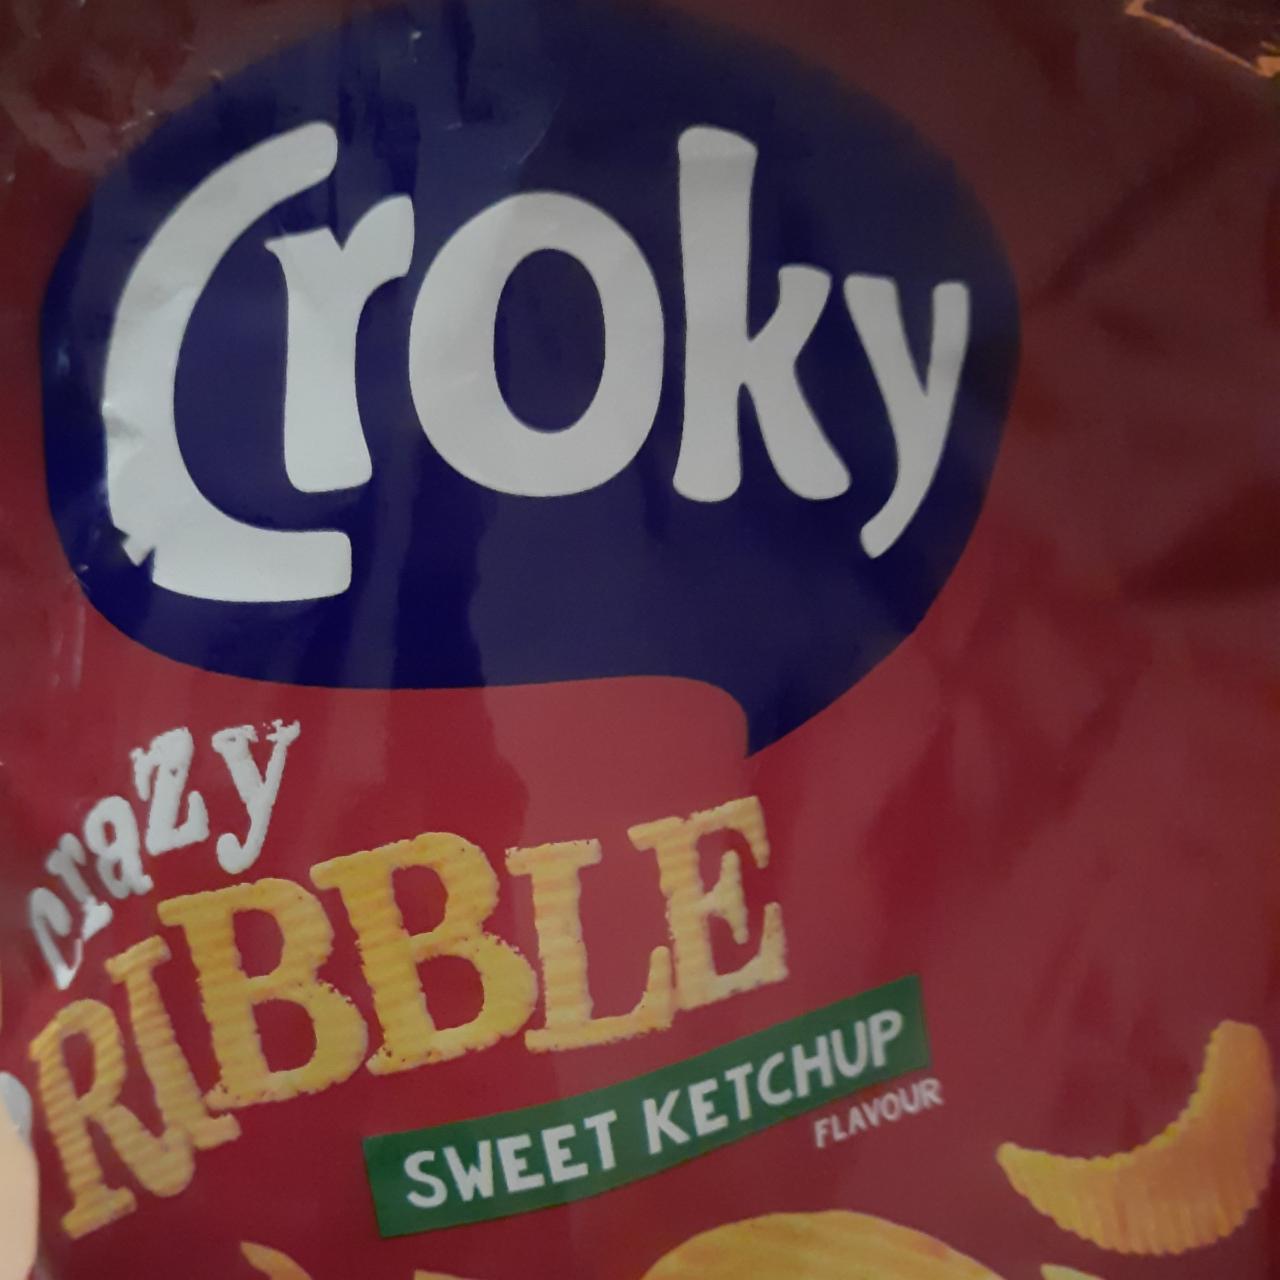 Fotografie - Crazy Ribble Sweet Ketchup flavour Croky